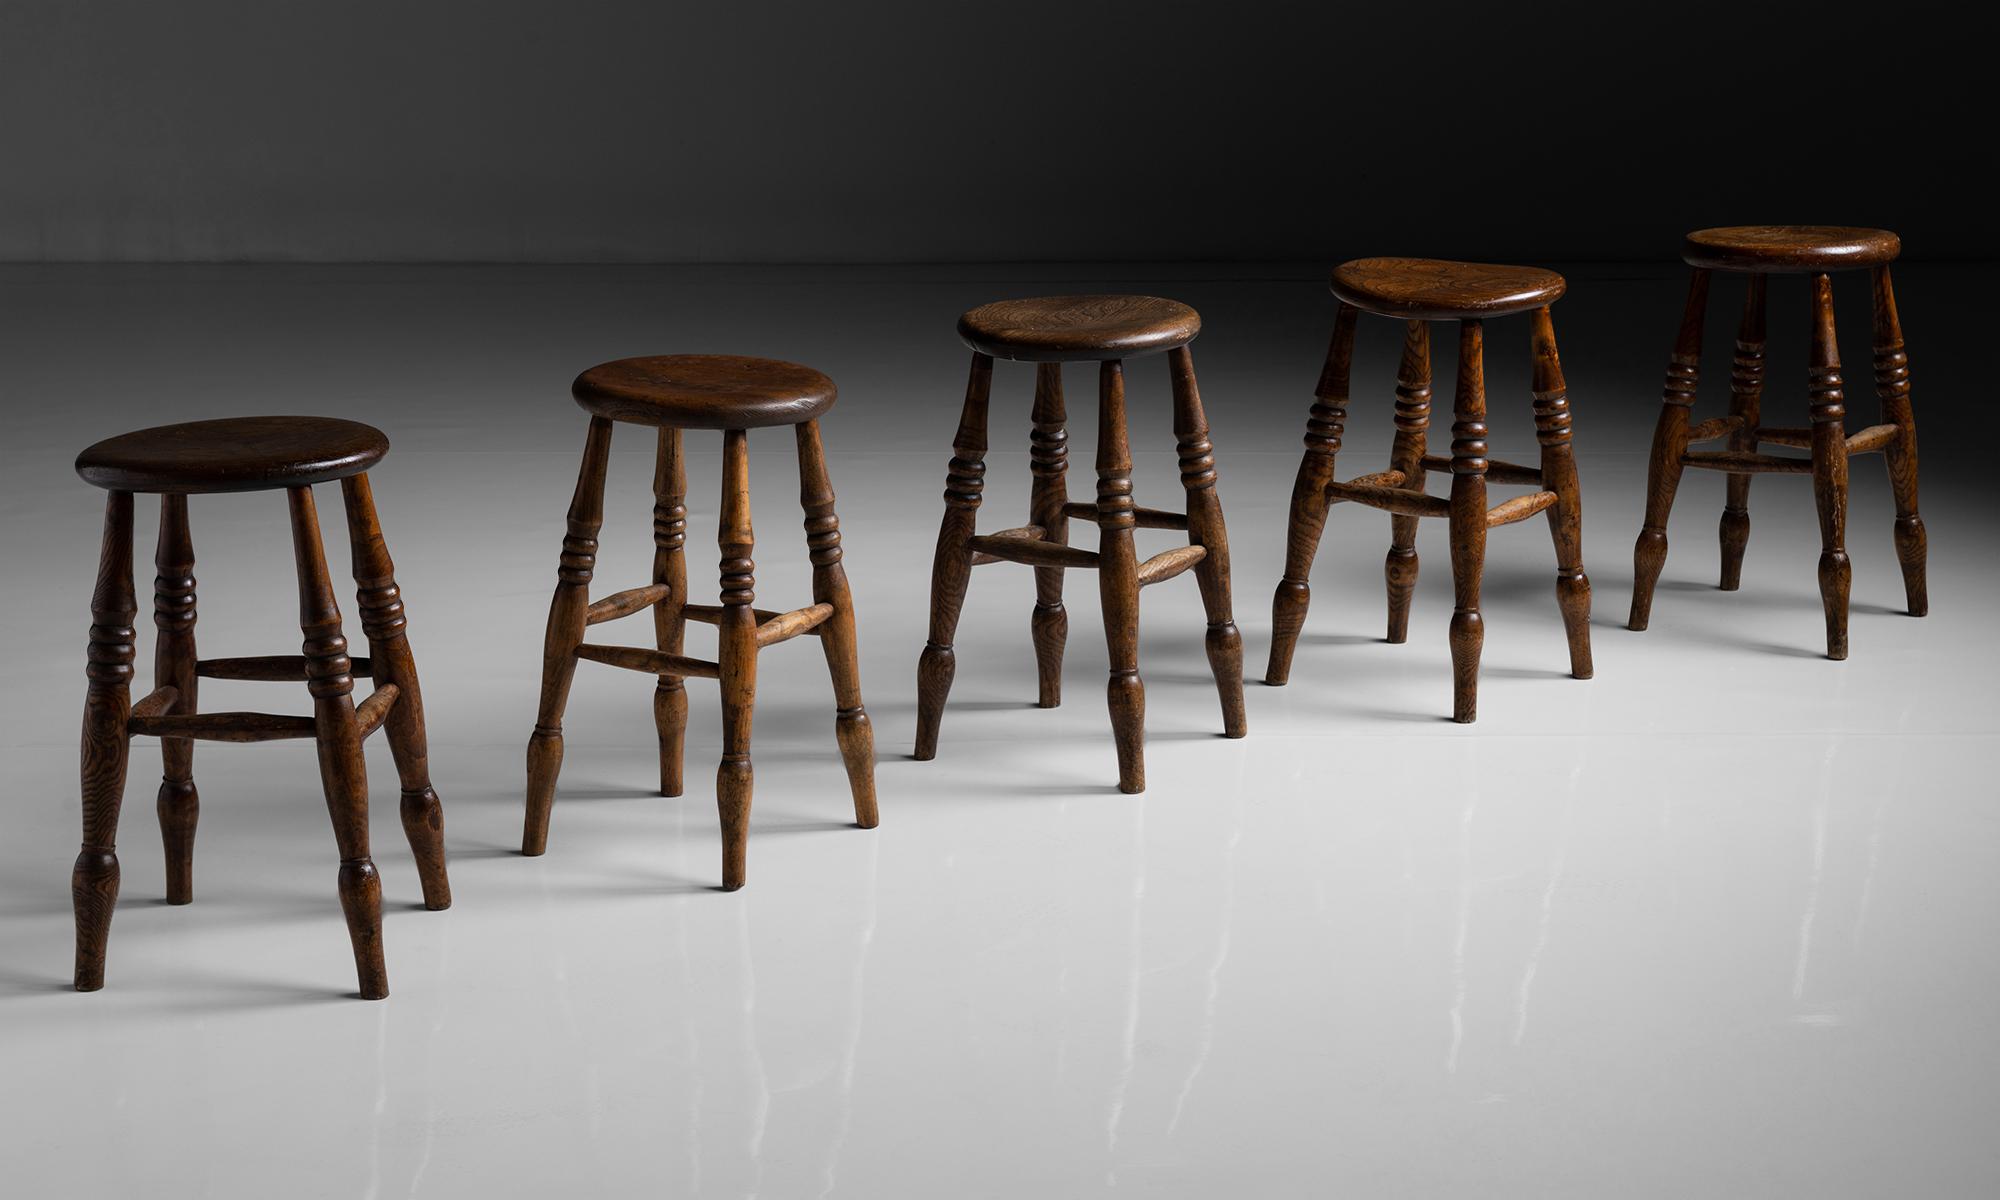 Elm & Ash Stools

England circa 1890

Classic pub stools with thick round top on turned legs.

Measures 12”w x 12”d x 21.5”h

*Please note the price is per unit, each stool sold separately*
